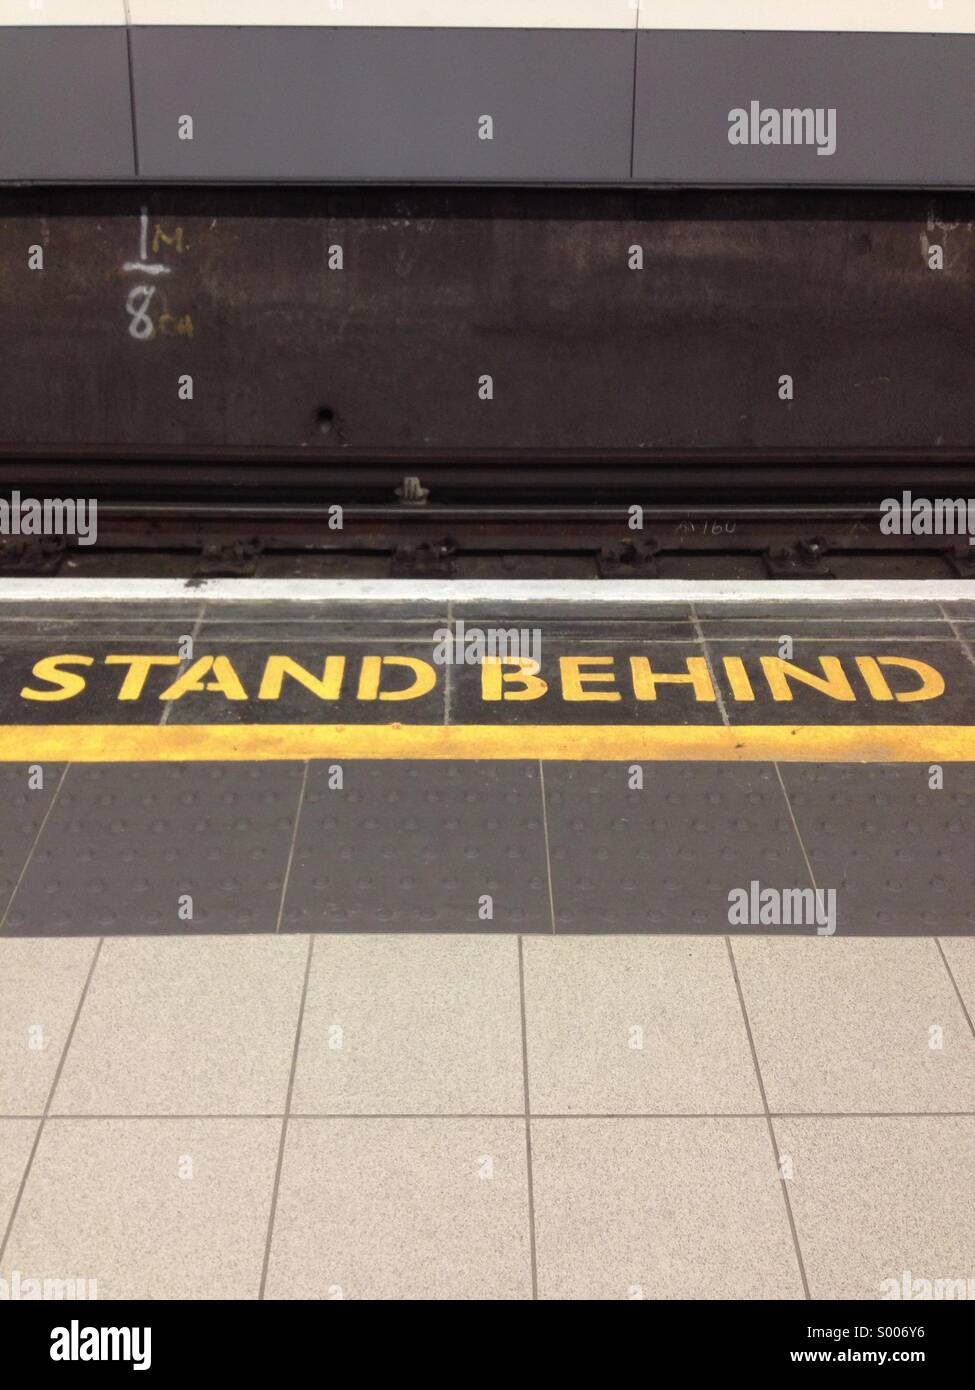 Stand behind warning sign in London Tube, UK Stock Photo